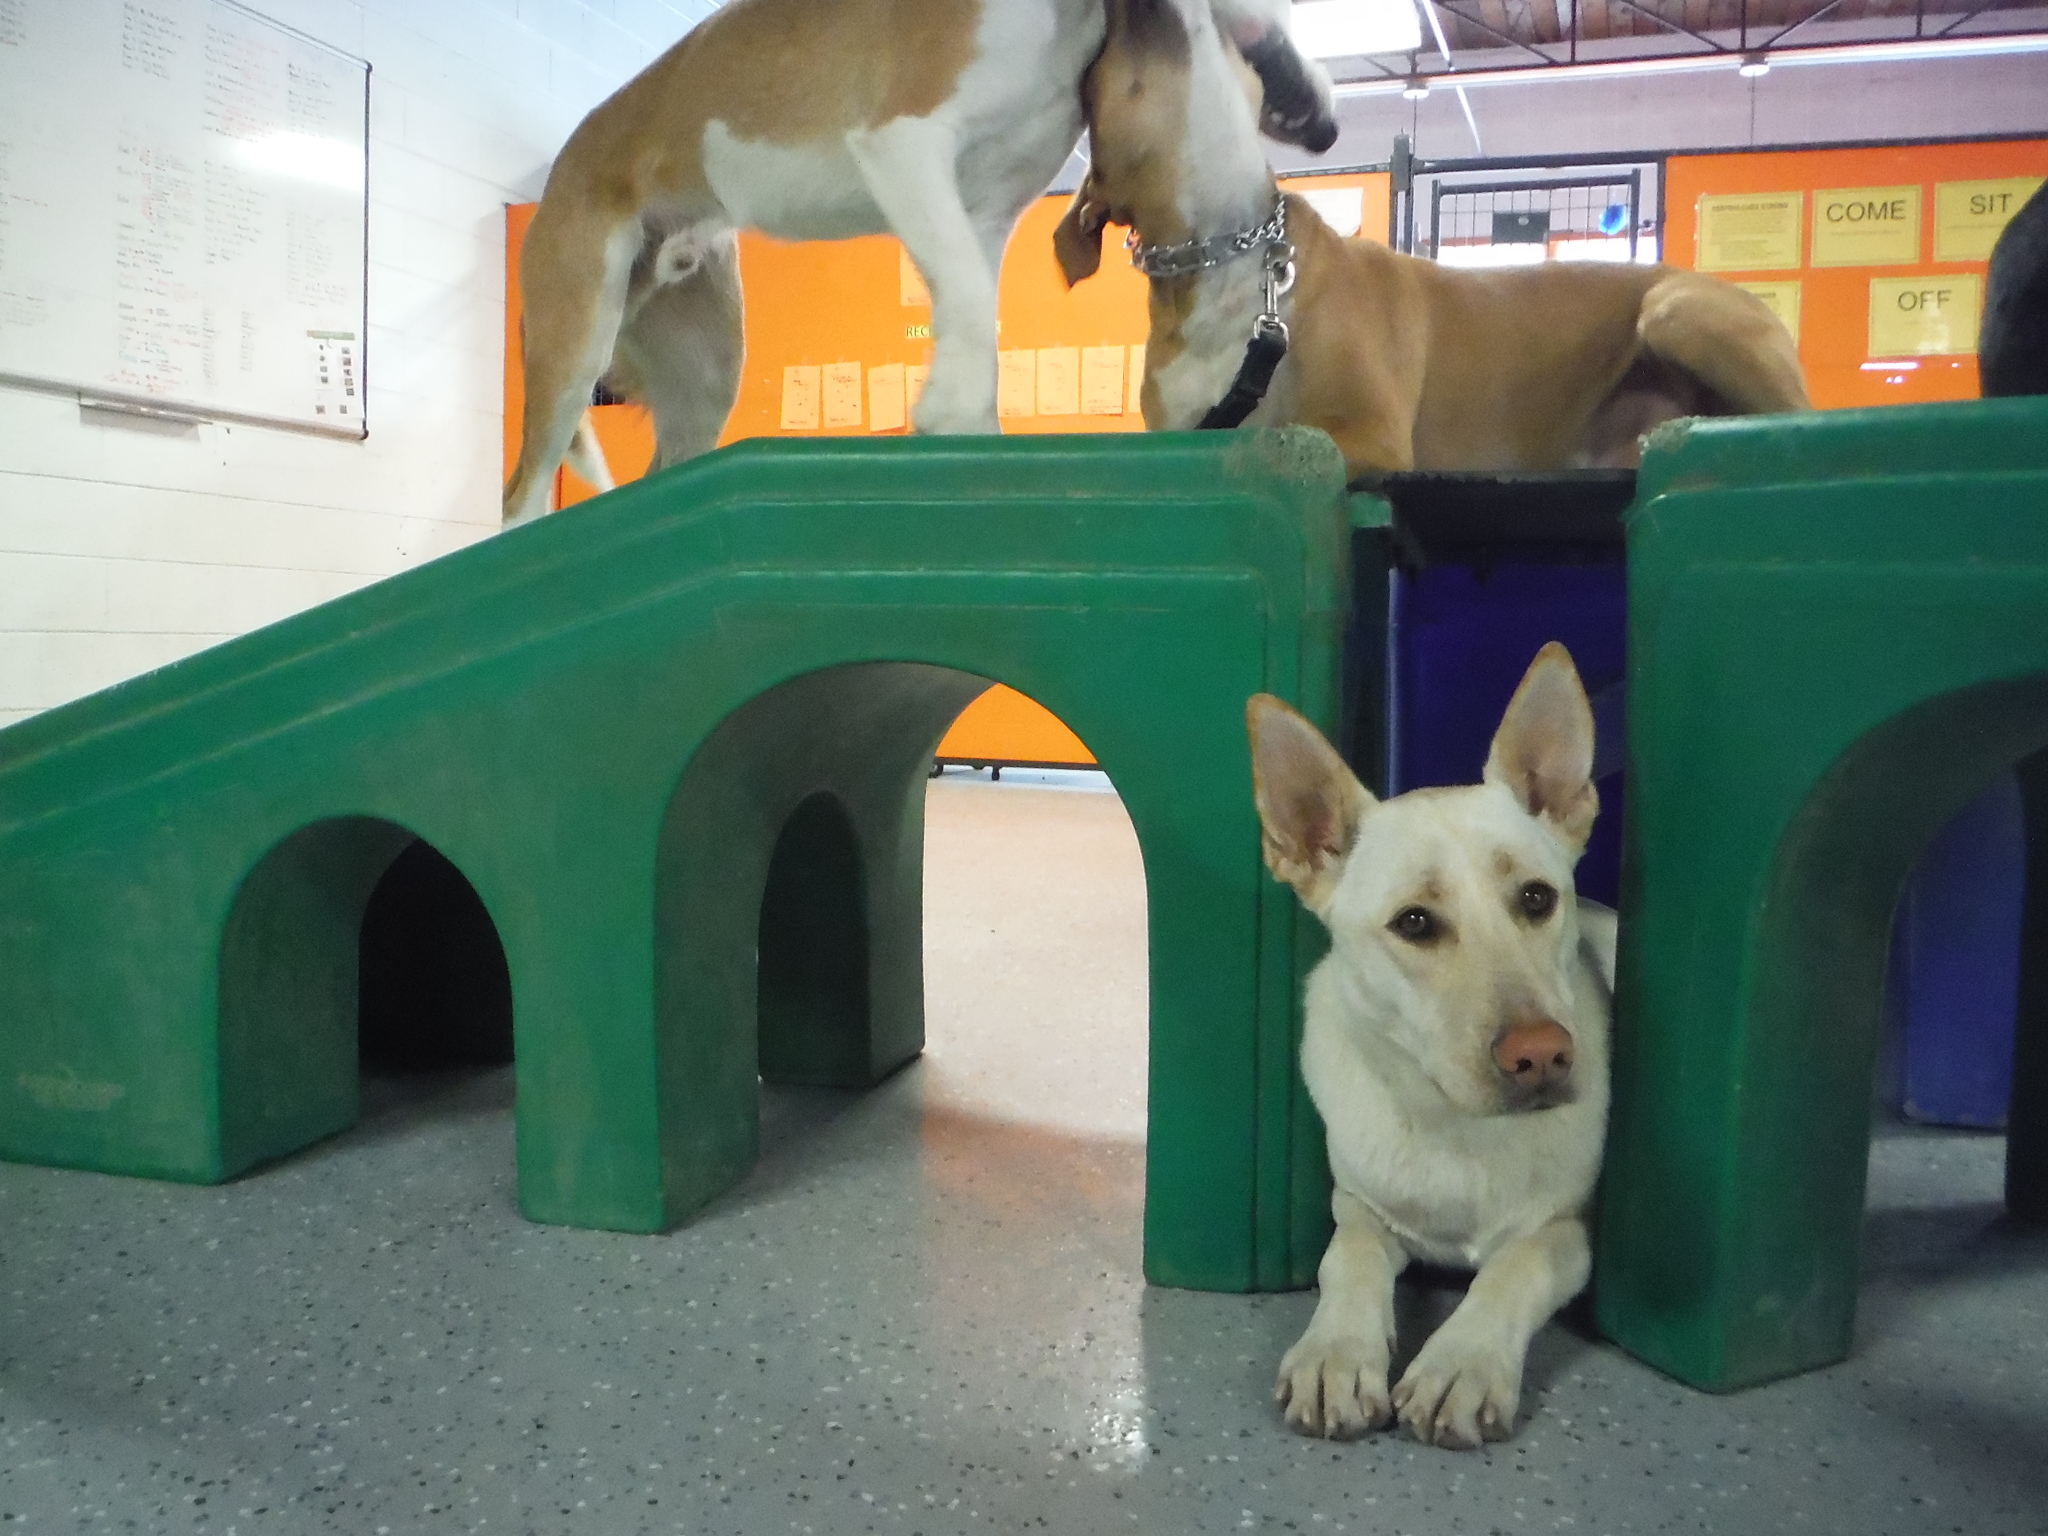 dogs playing with toy blocks in a school